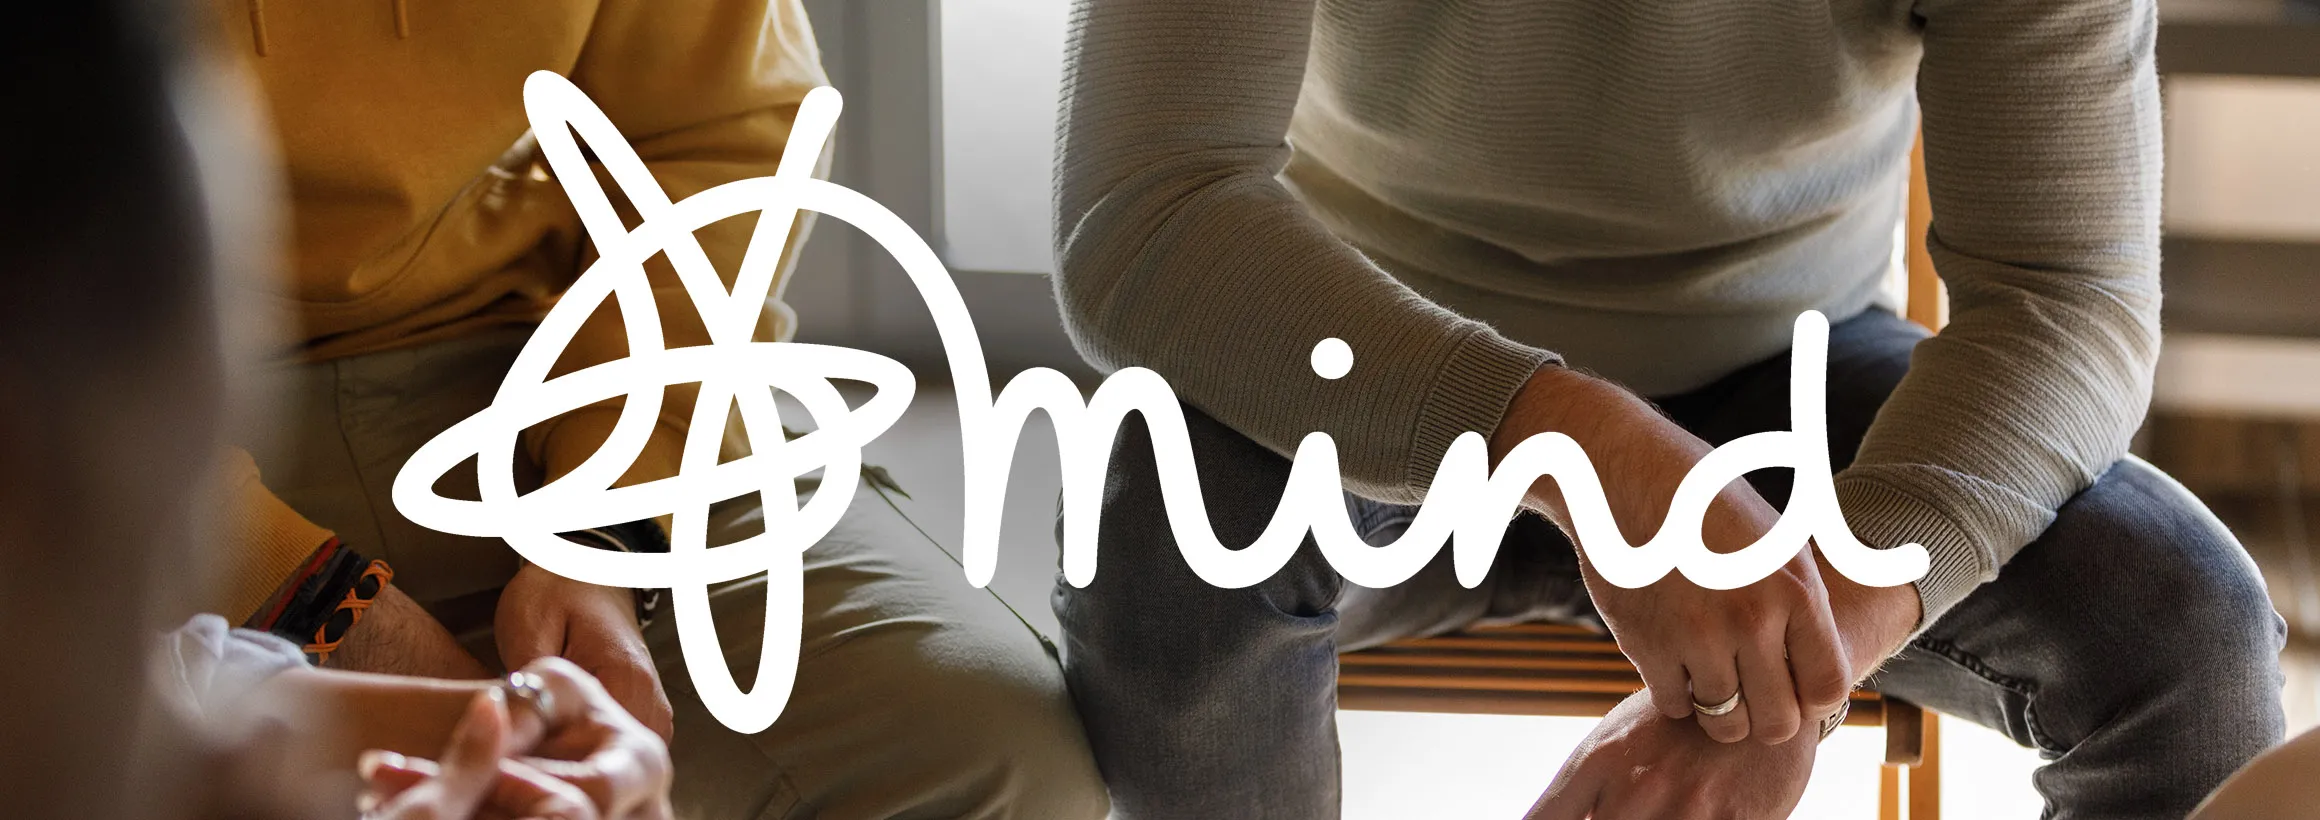 Mind logo over a close up of people talking - they are seated and you can just see their arms, hands and laps